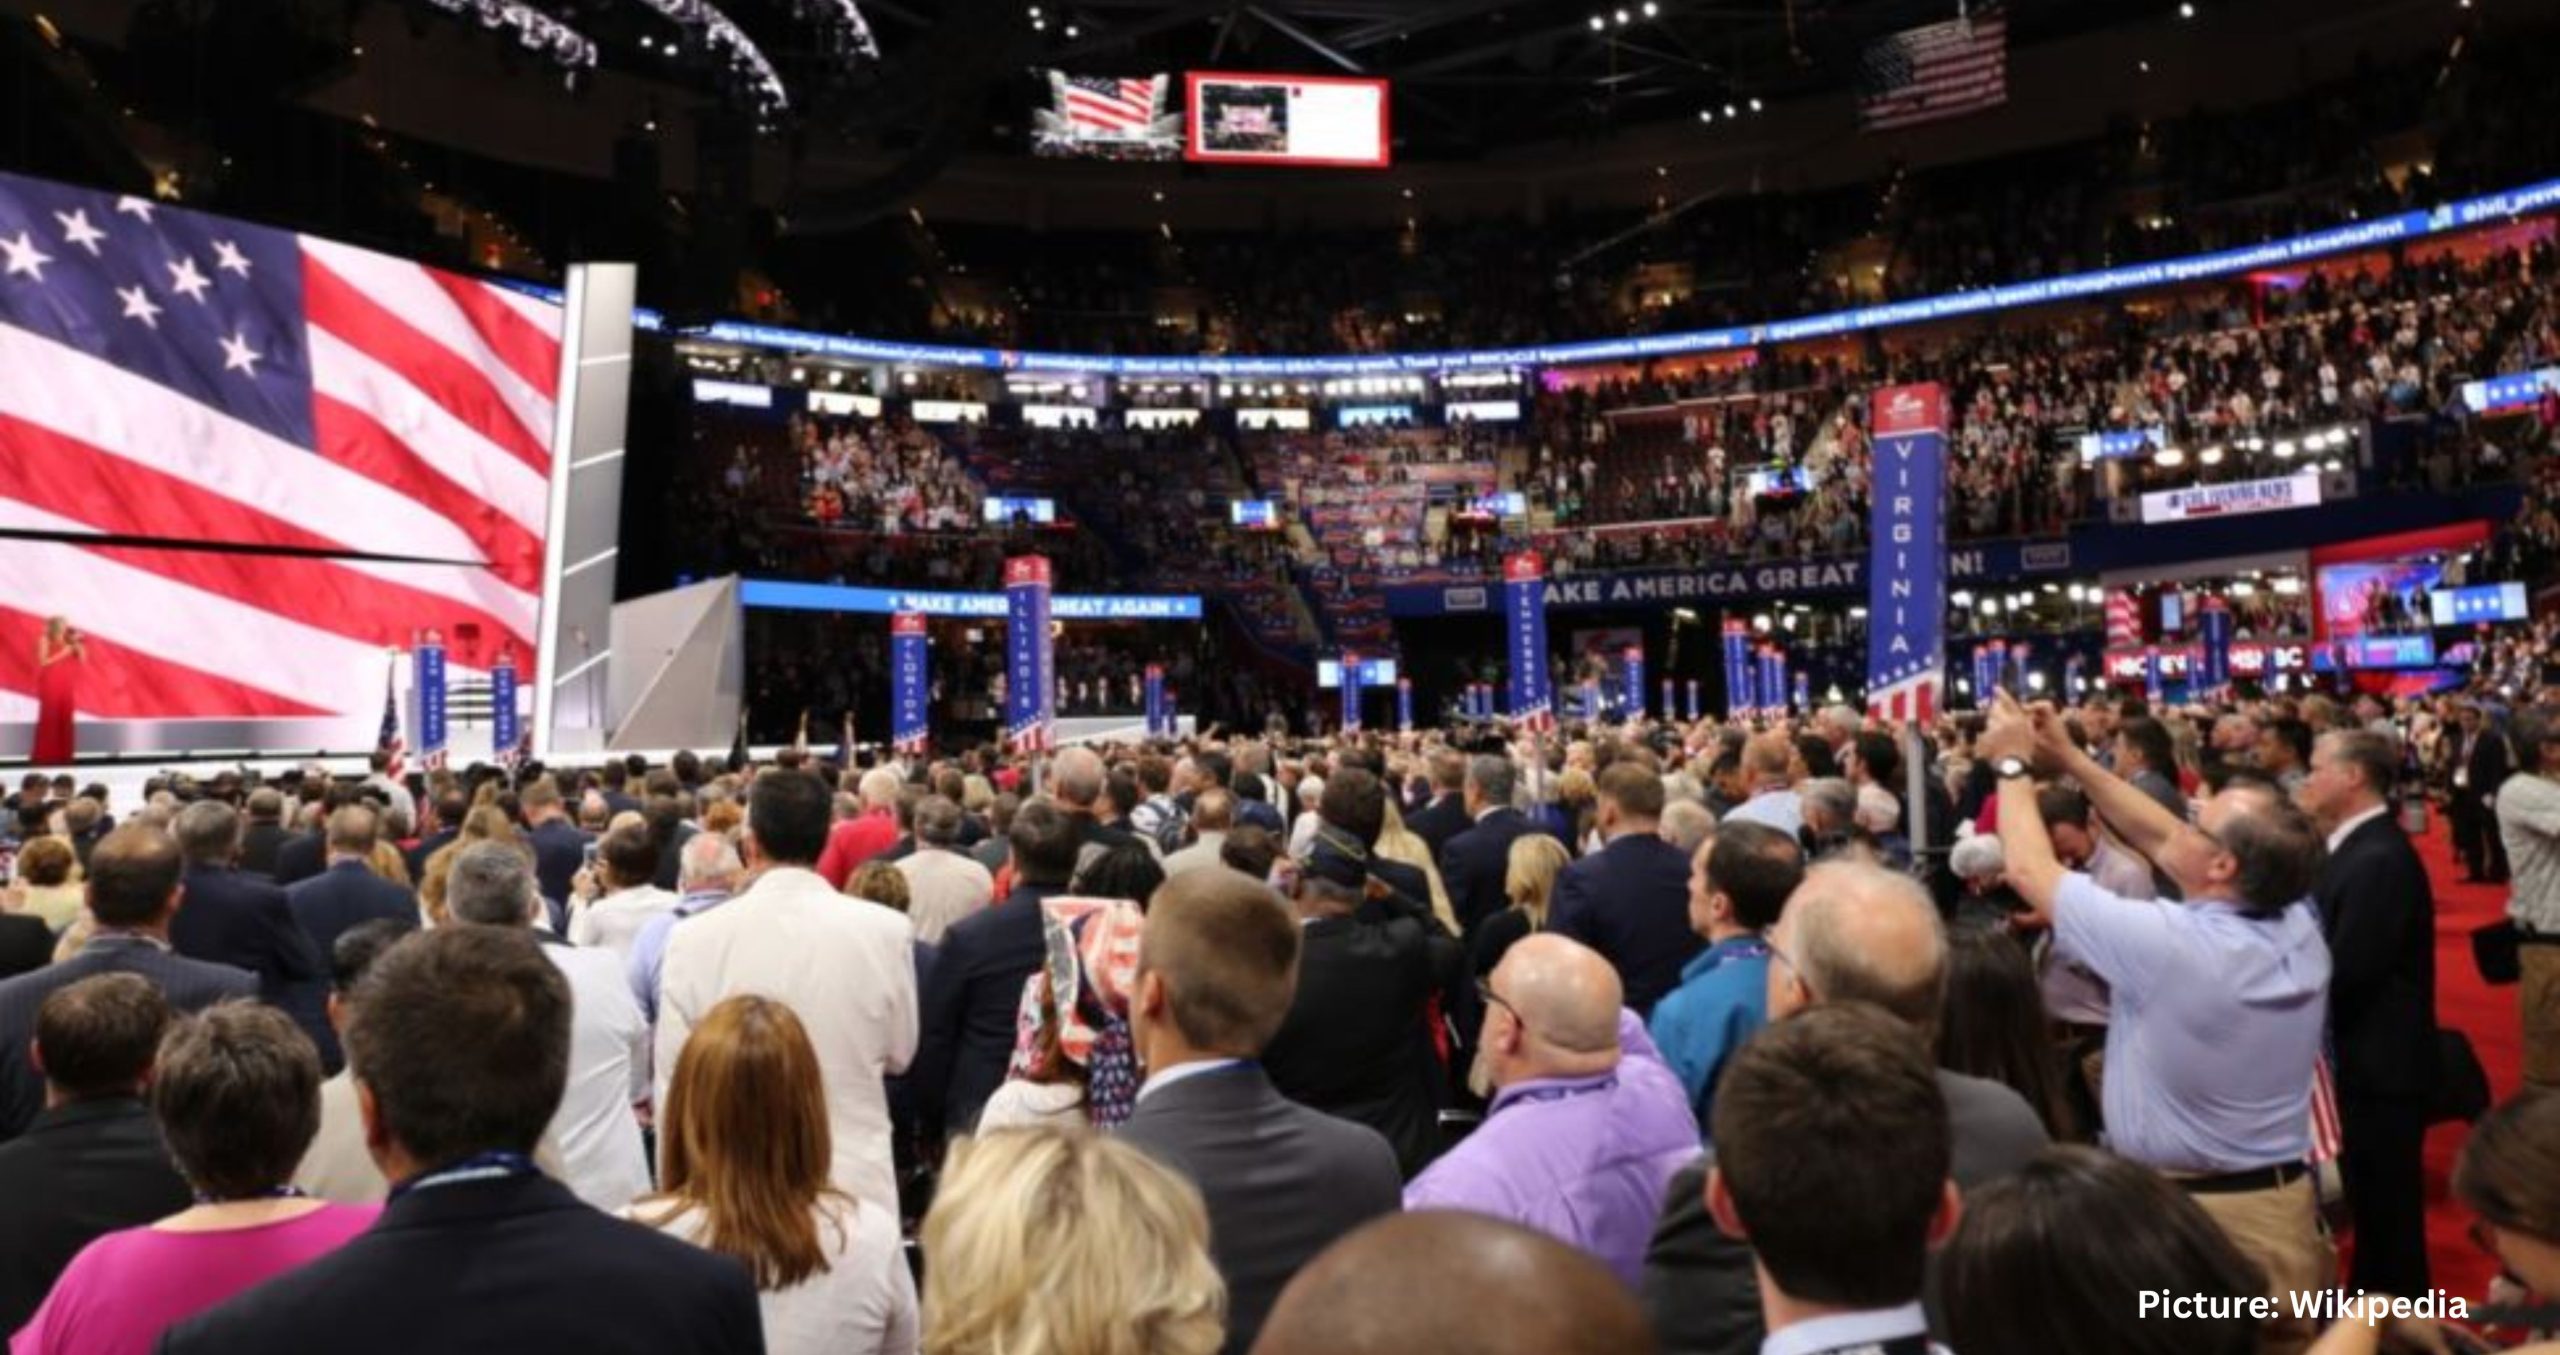 Unity and Underlying Tensions: Key Takeaways from Day 2 of the GOP Convention